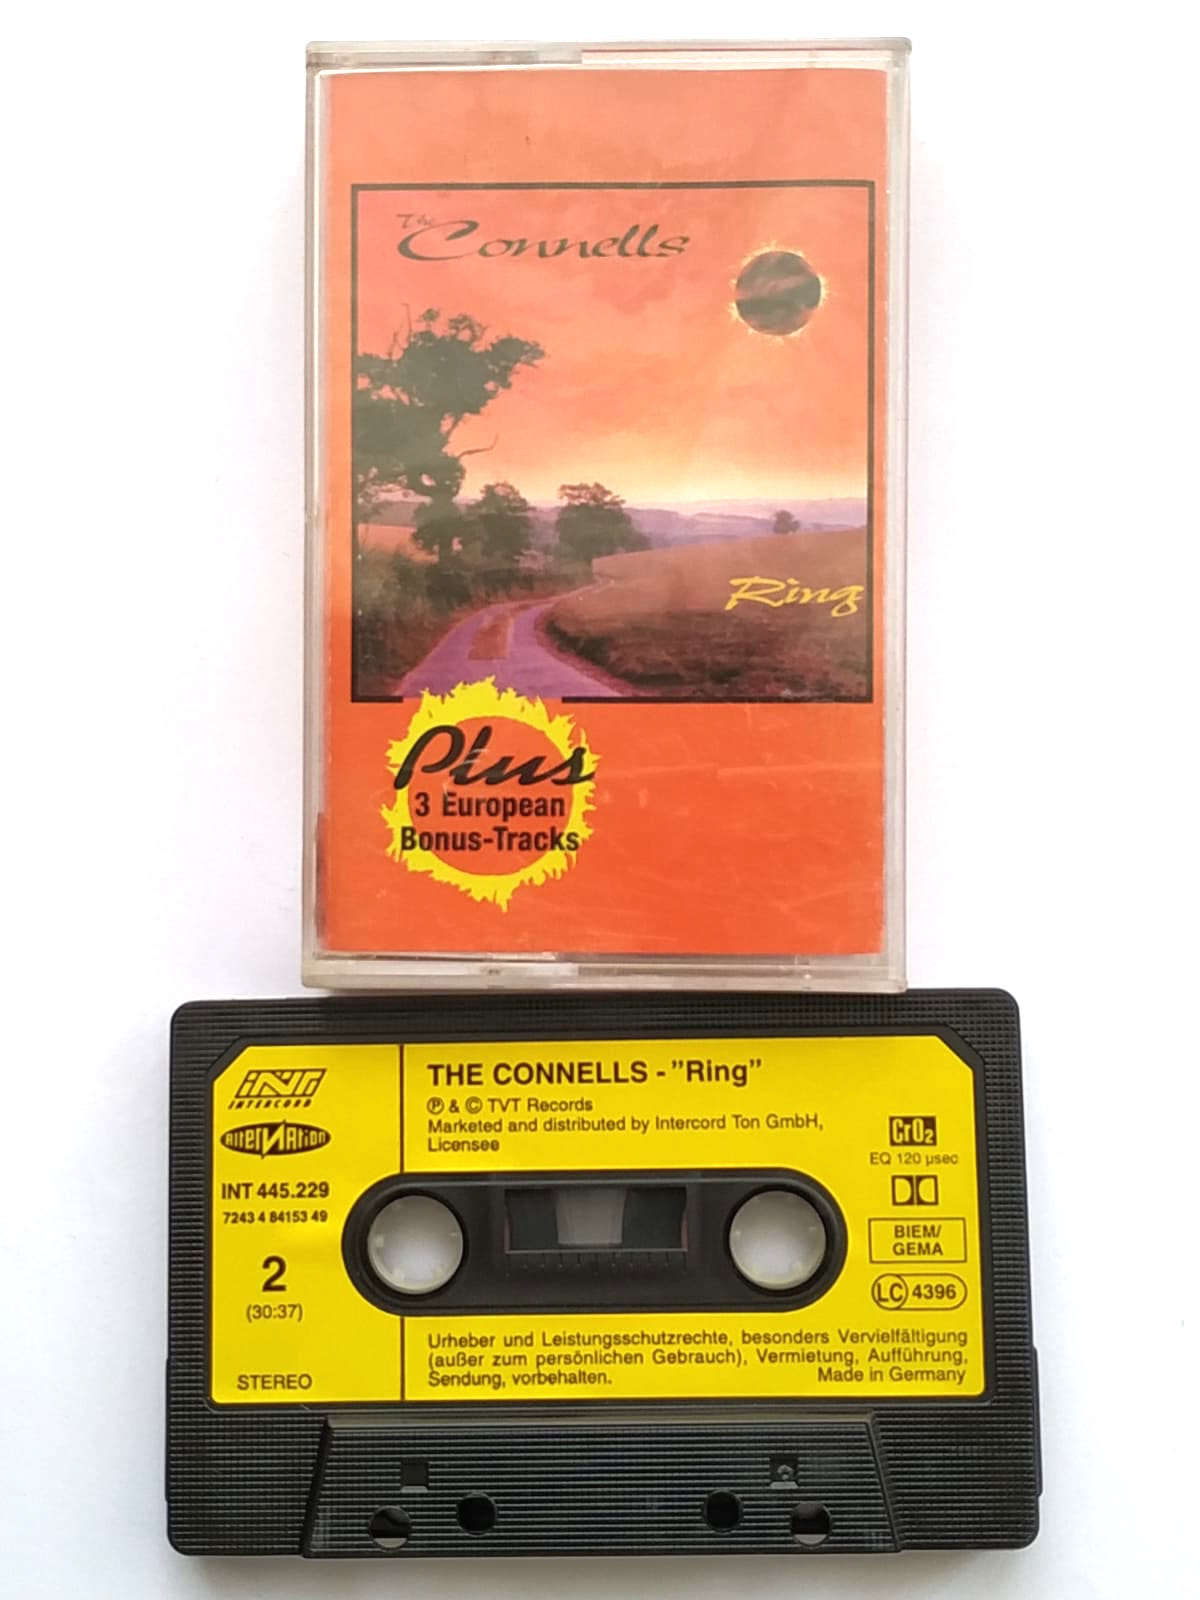 Goodwill Foto pustes op The Connells / Ring - Kaset - 37.08 TL + KDV